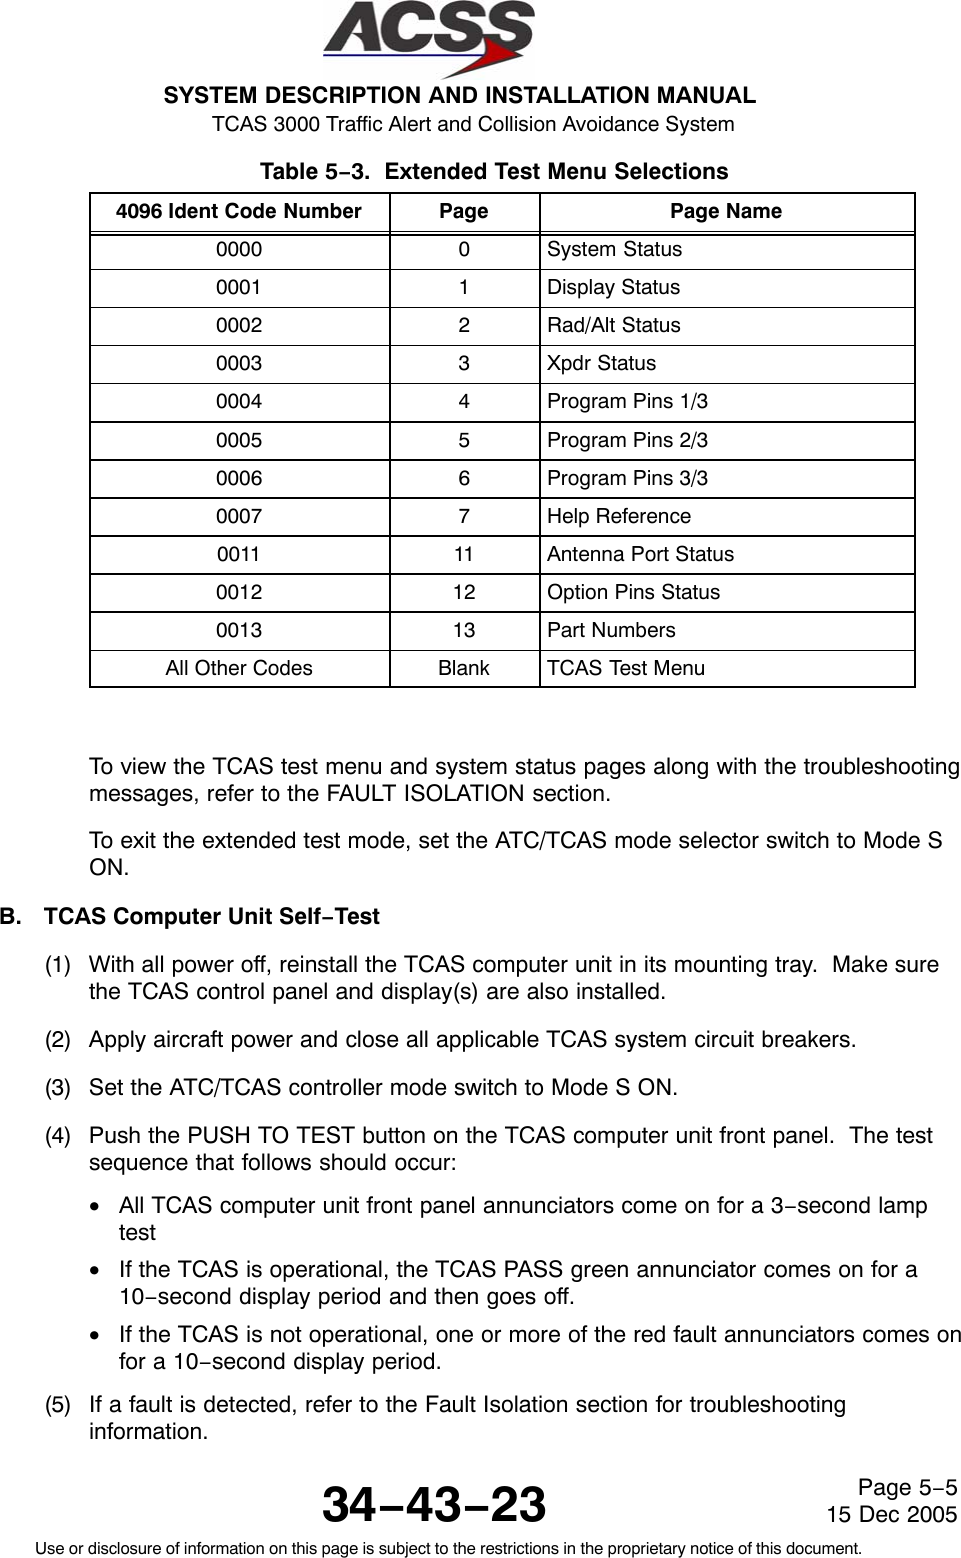 SYSTEM DESCRIPTION AND INSTALLATION MANUAL TCAS 3000 Traffic Alert and Collision Avoidance System34−43−23Use or disclosure of information on this page is subject to the restrictions in the proprietary notice of this document.Page 5−515 Dec 2005Table 5−3.  Extended Test Menu Selections  4096 Ident Code Number Page Page Name0000 0 System Status0001 1 Display Status0002 2 Rad/Alt Status0003 3 Xpdr Status0004 4 Program Pins 1/30005 5 Program Pins 2/30006 6 Program Pins 3/30007 7 Help Reference0011 11 Antenna Port Status0012 12 Option Pins Status0013 13 Part NumbersAll Other Codes Blank TCAS Test MenuTo view the TCAS test menu and system status pages along with the troubleshootingmessages, refer to the FAULT ISOLATION section.To exit the extended test mode, set the ATC/TCAS mode selector switch to Mode SON.B. TCAS Computer Unit Self−Test(1) With all power off, reinstall the TCAS computer unit in its mounting tray.  Make surethe TCAS control panel and display(s) are also installed.(2) Apply aircraft power and close all applicable TCAS system circuit breakers.(3) Set the ATC/TCAS controller mode switch to Mode S ON.(4) Push the PUSH TO TEST button on the TCAS computer unit front panel.  The testsequence that follows should occur:•All TCAS computer unit front panel annunciators come on for a 3−second lamptest•If the TCAS is operational, the TCAS PASS green annunciator comes on for a10−second display period and then goes off.•If the TCAS is not operational, one or more of the red fault annunciators comes onfor a 10−second display period.(5) If a fault is detected, refer to the Fault Isolation section for troubleshootinginformation.